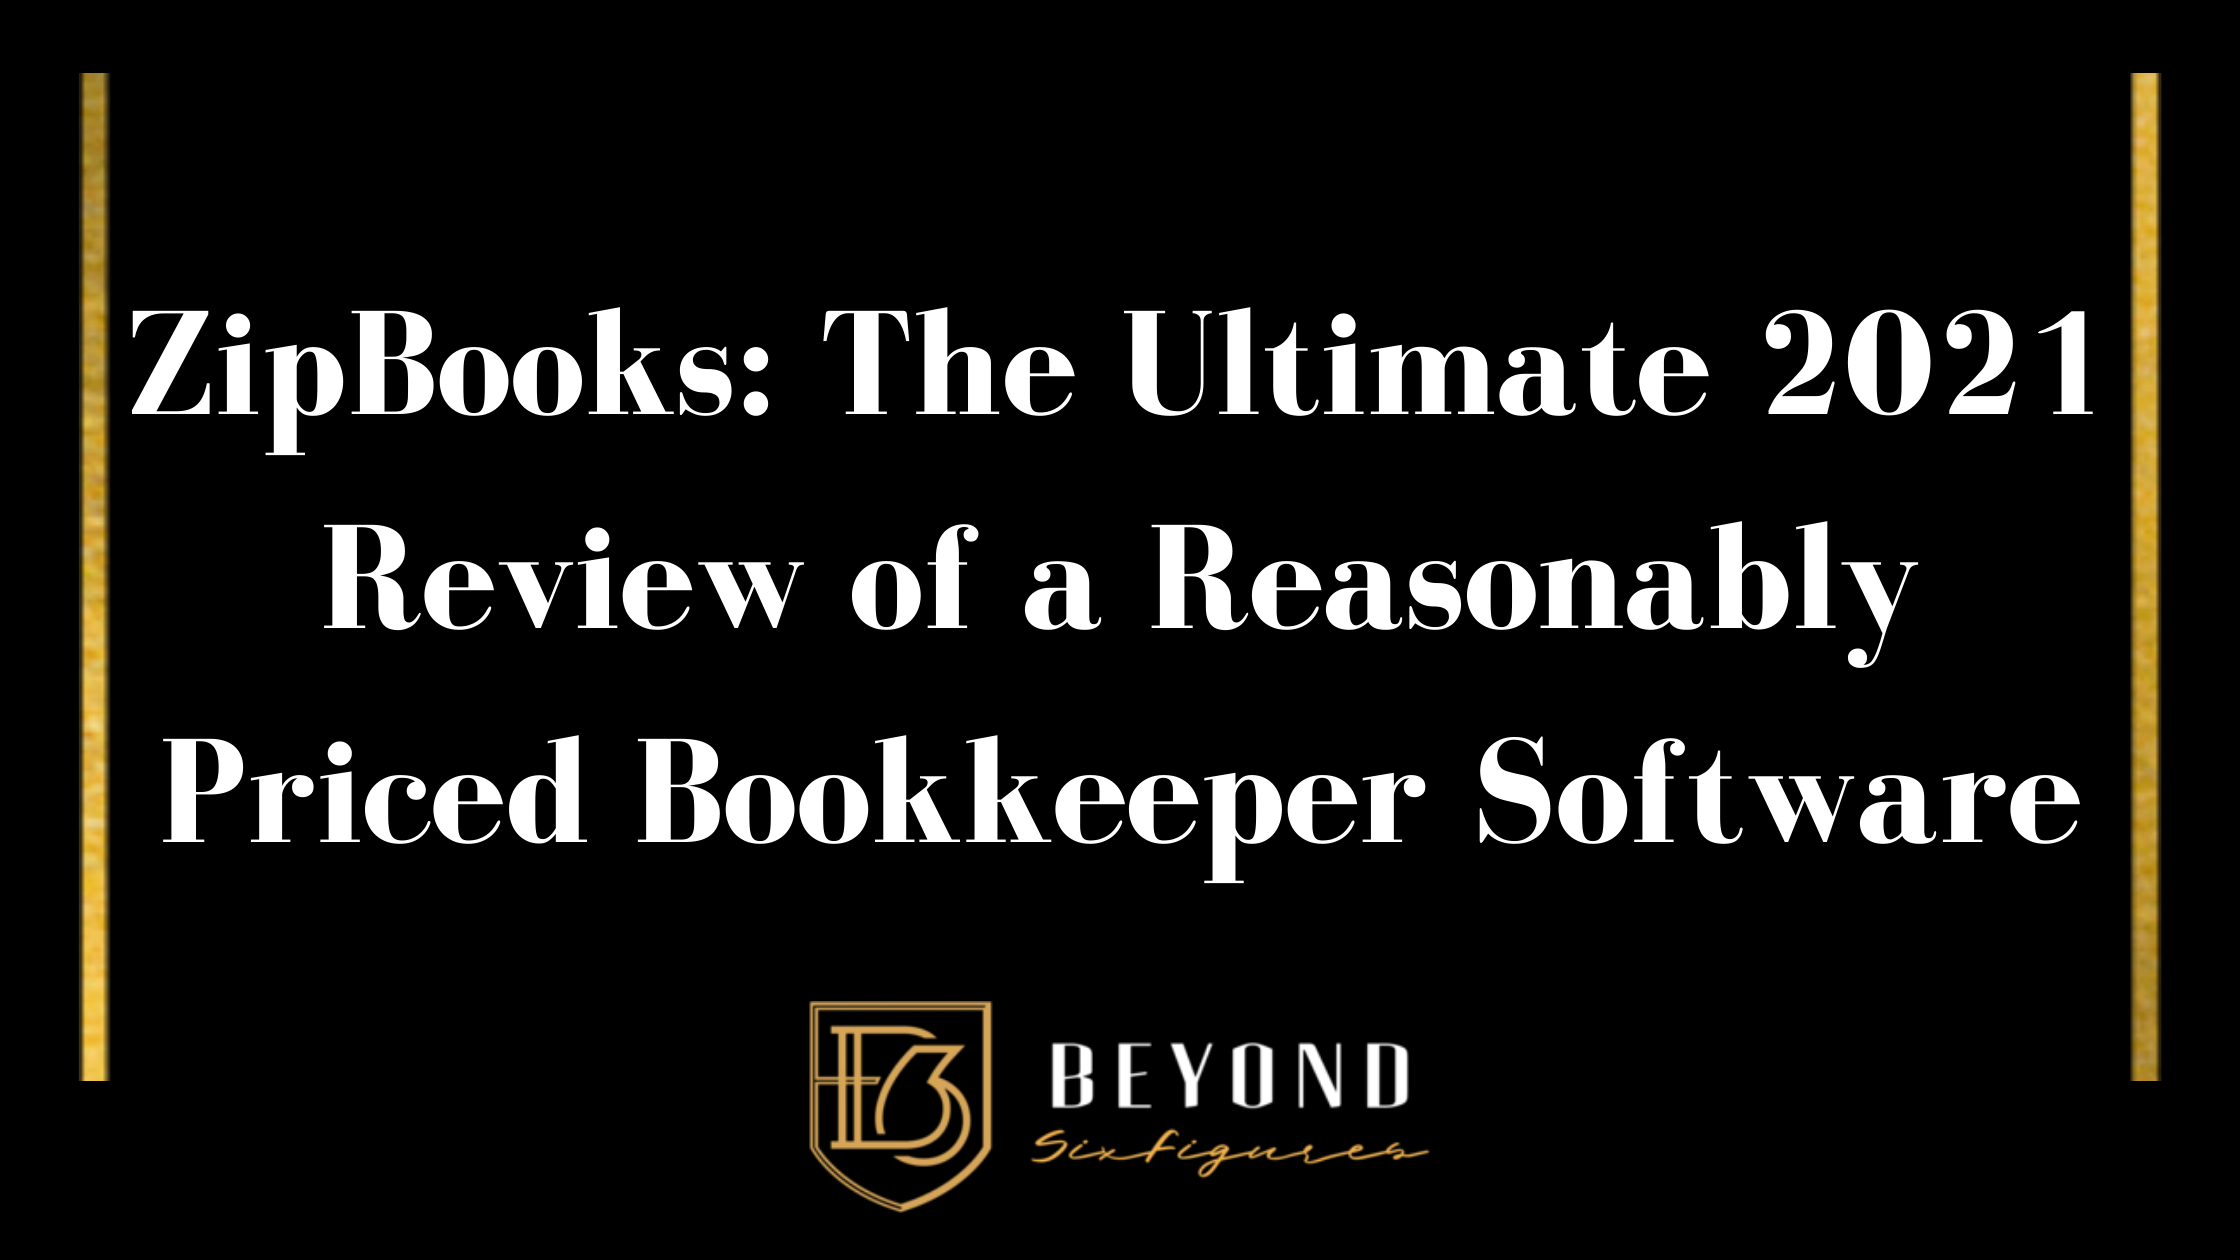 ZipBooks: The Ultimate 2021 Review of a Reasonably Priced Bookkeeper Software